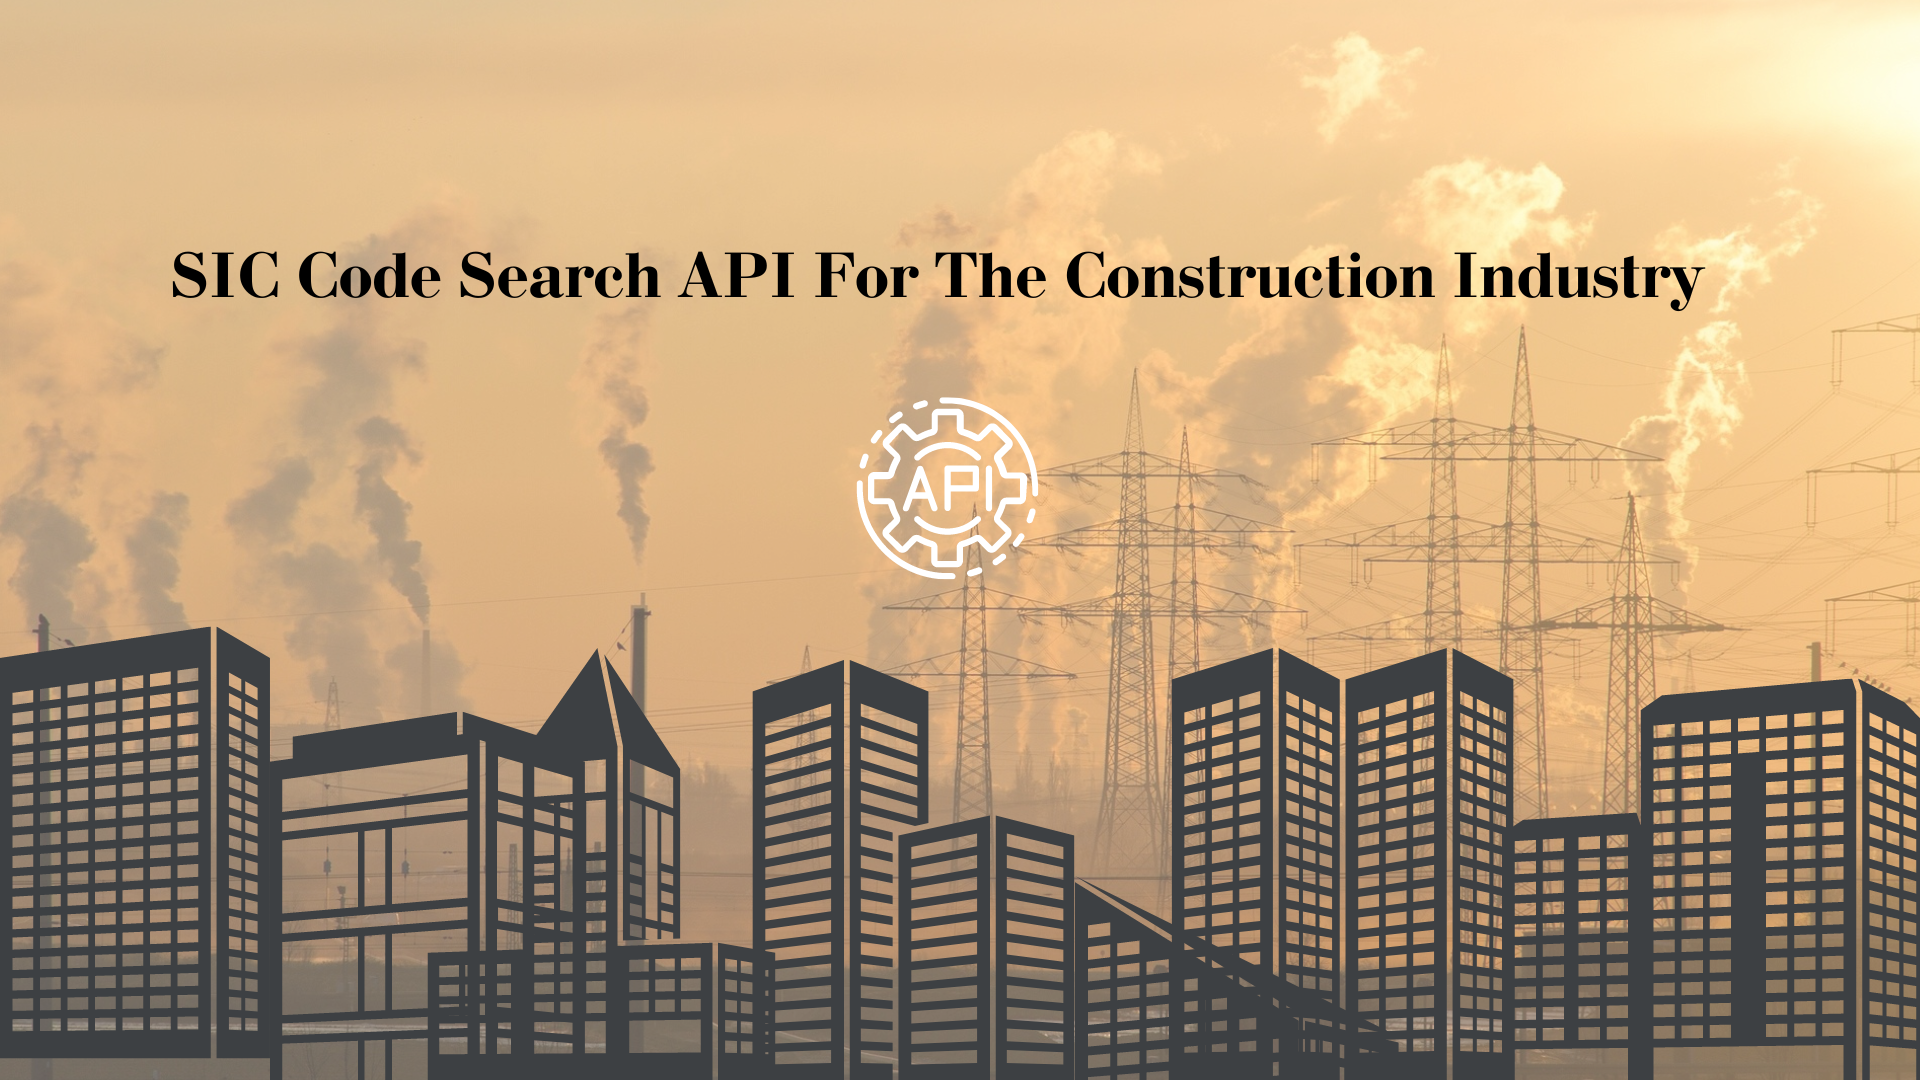 SIC Code Search API For The Construction Industry